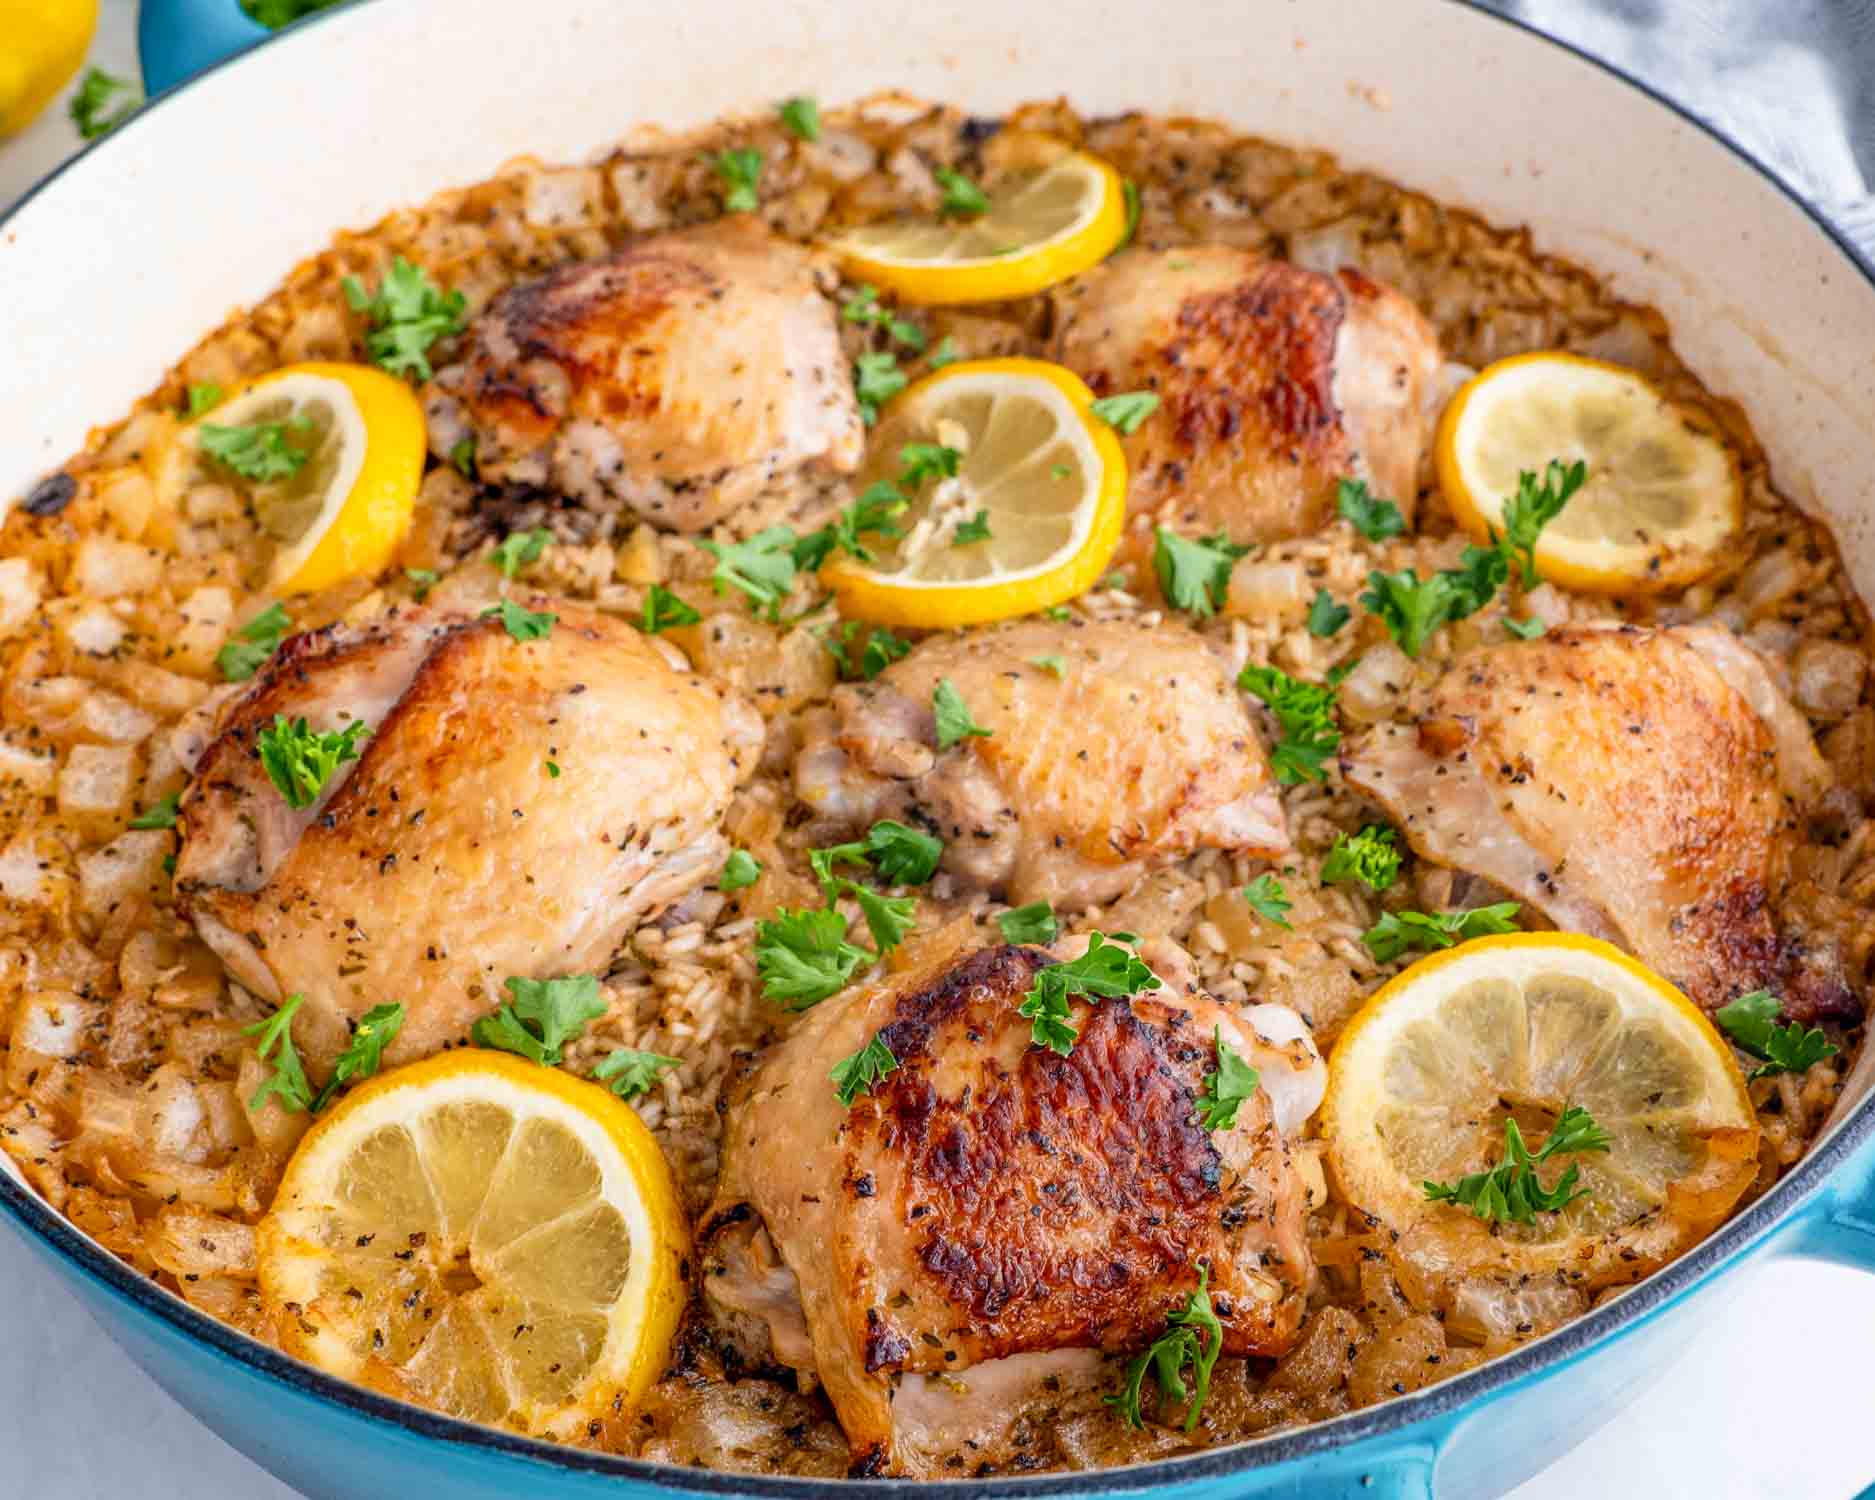 lemon chicken rice bake in a blue dutch oven garnished with parsley.